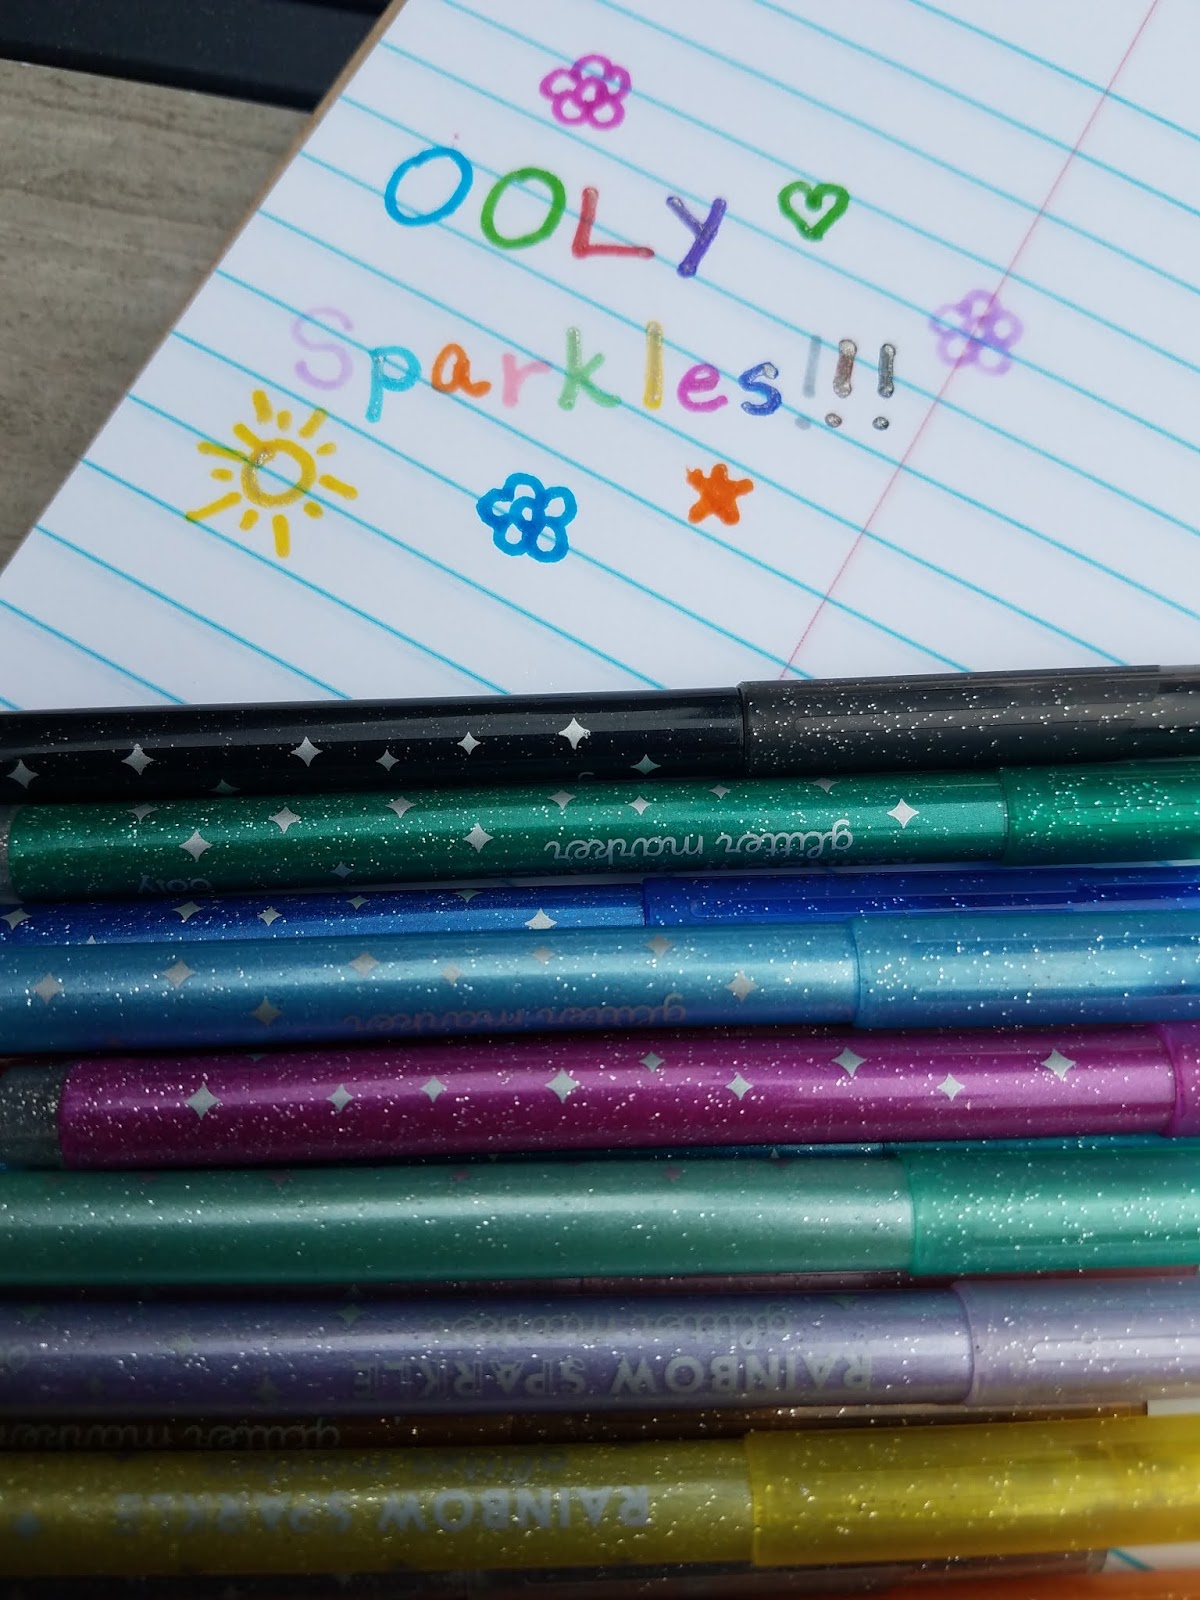 Rainbow Sparkle Glitter Markers - Set of 15 by OOLY